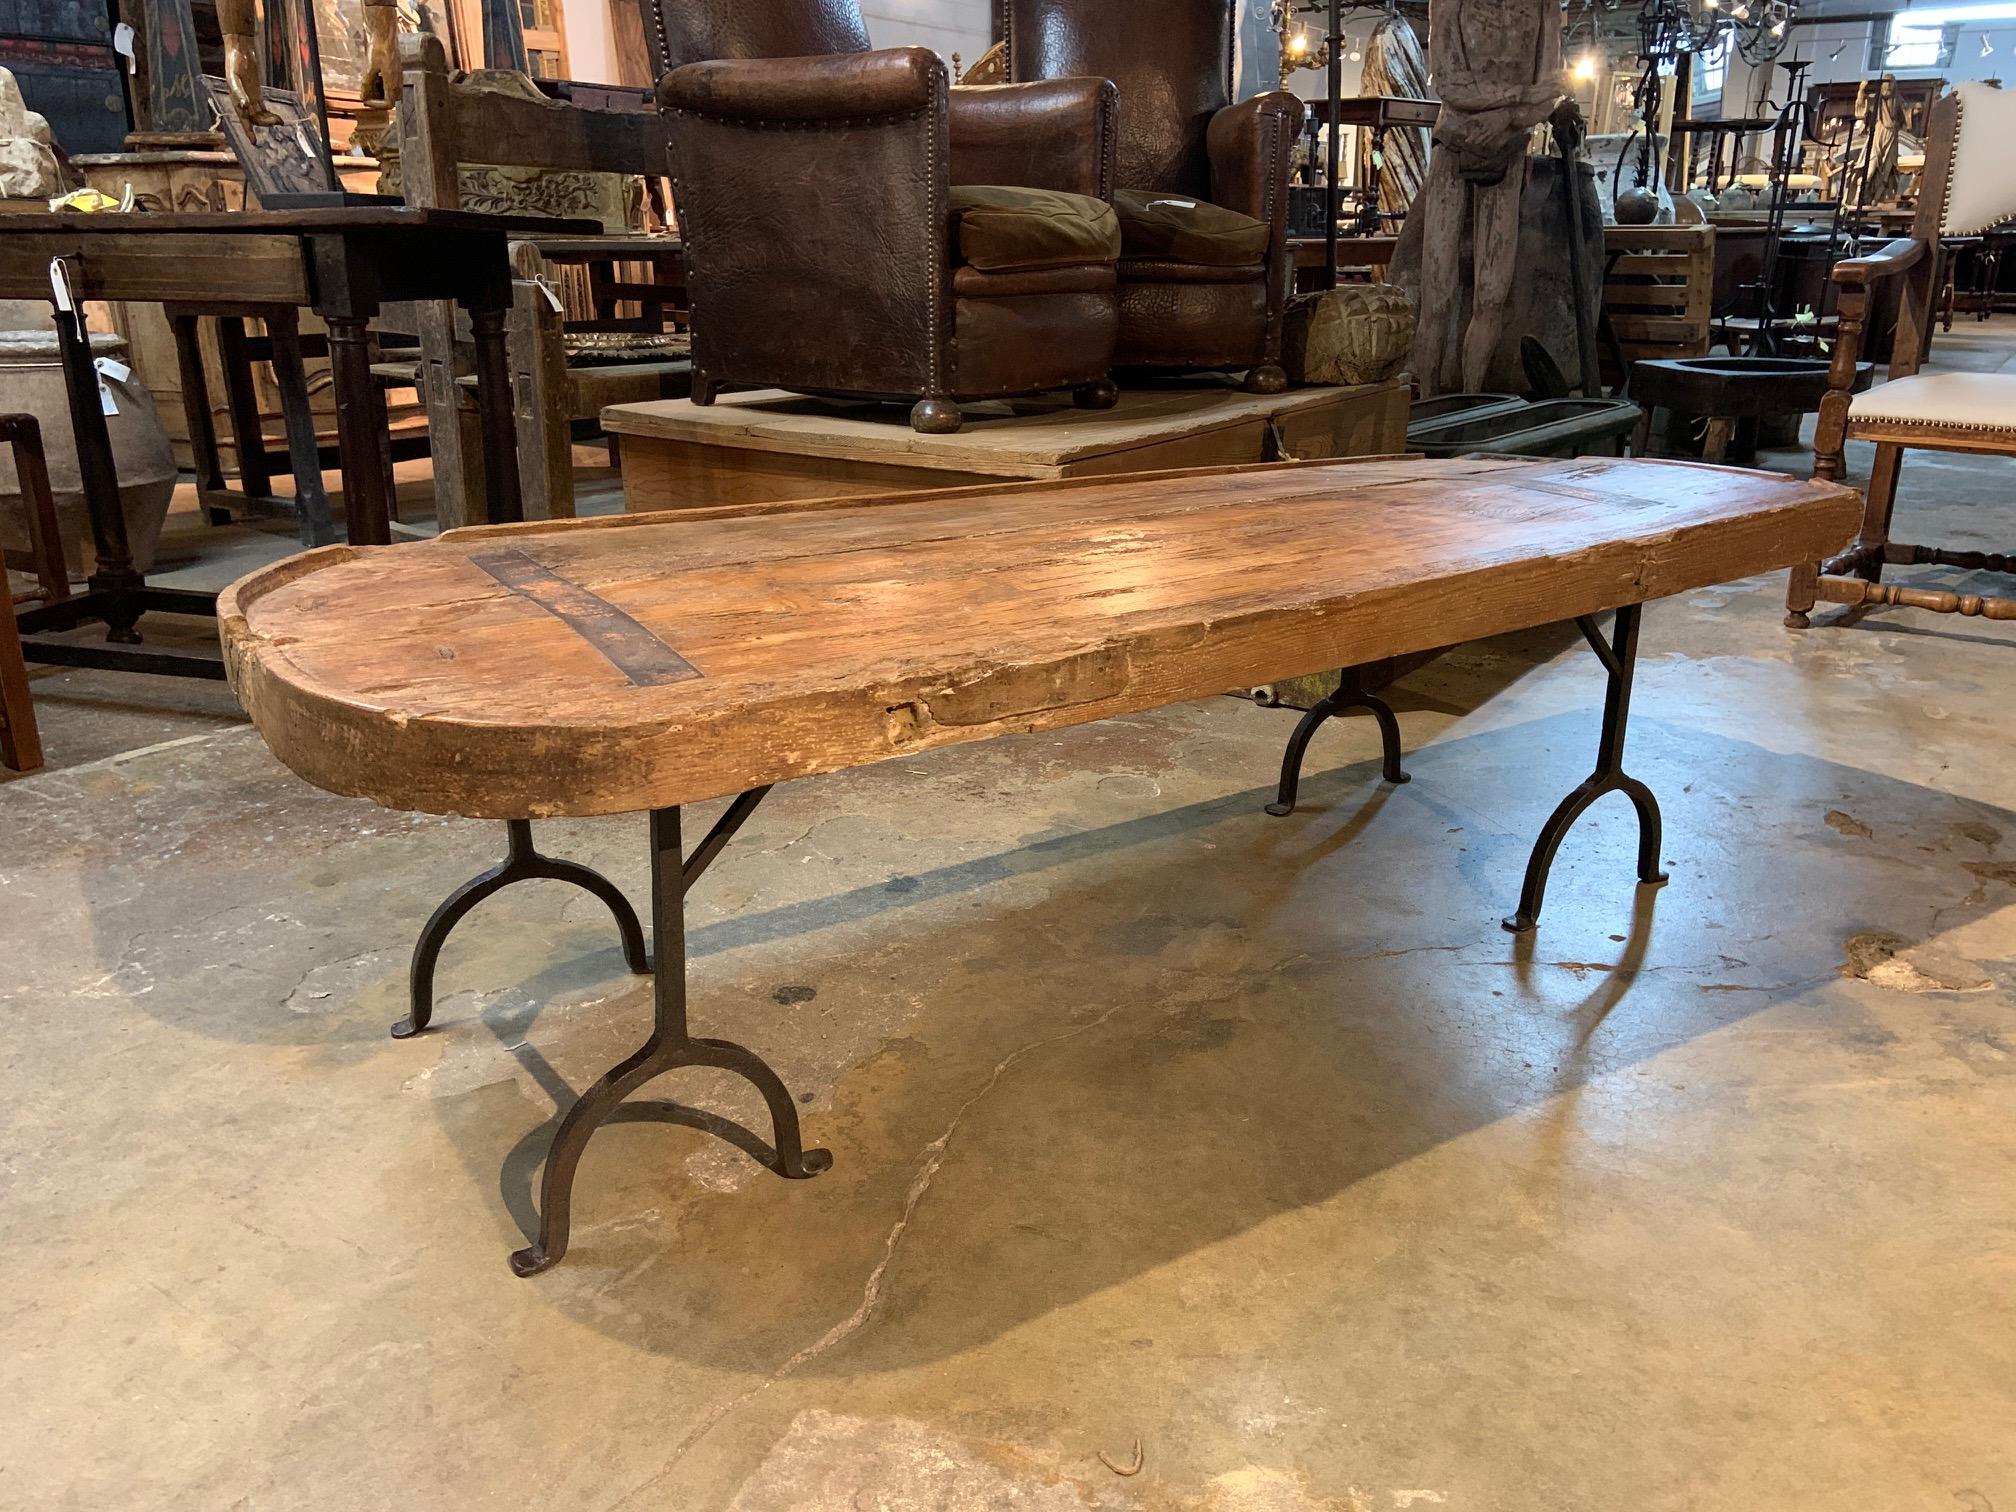 A very attractive 18th century Primitive cheese making board - now as a coffee table... Soundly constructed from an 18th century French cheese making board in pine and an 18th century Italian hand forged iron base. A terrific cocktail table - coffee